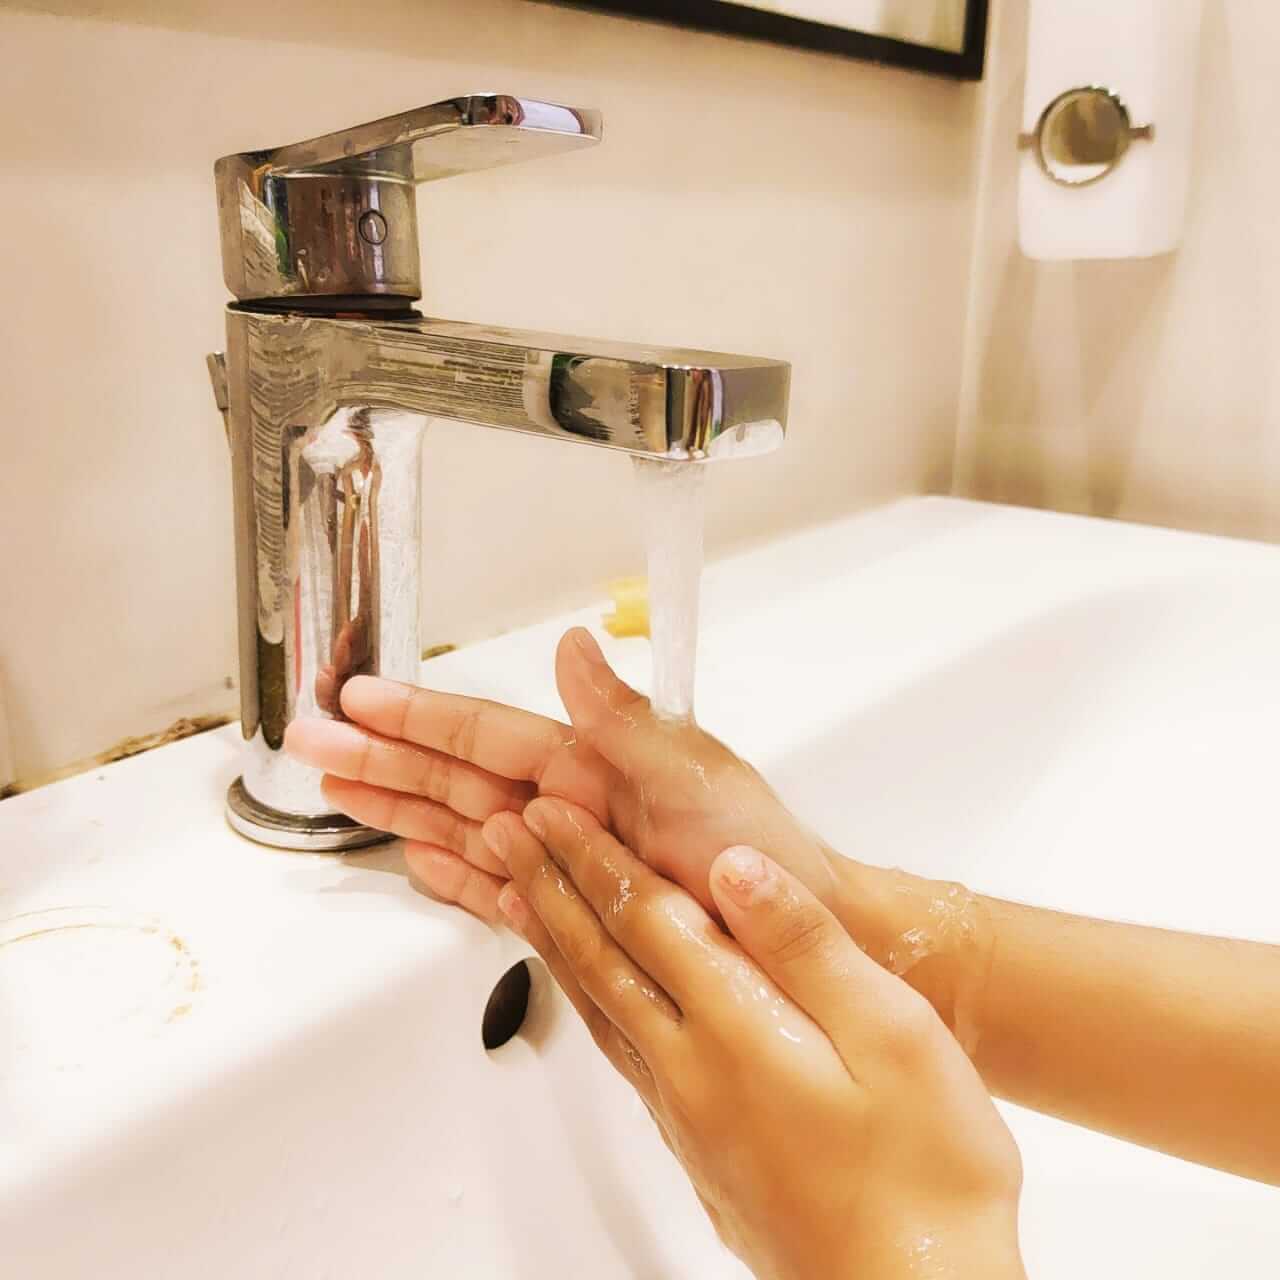 washing hands to boost immunity